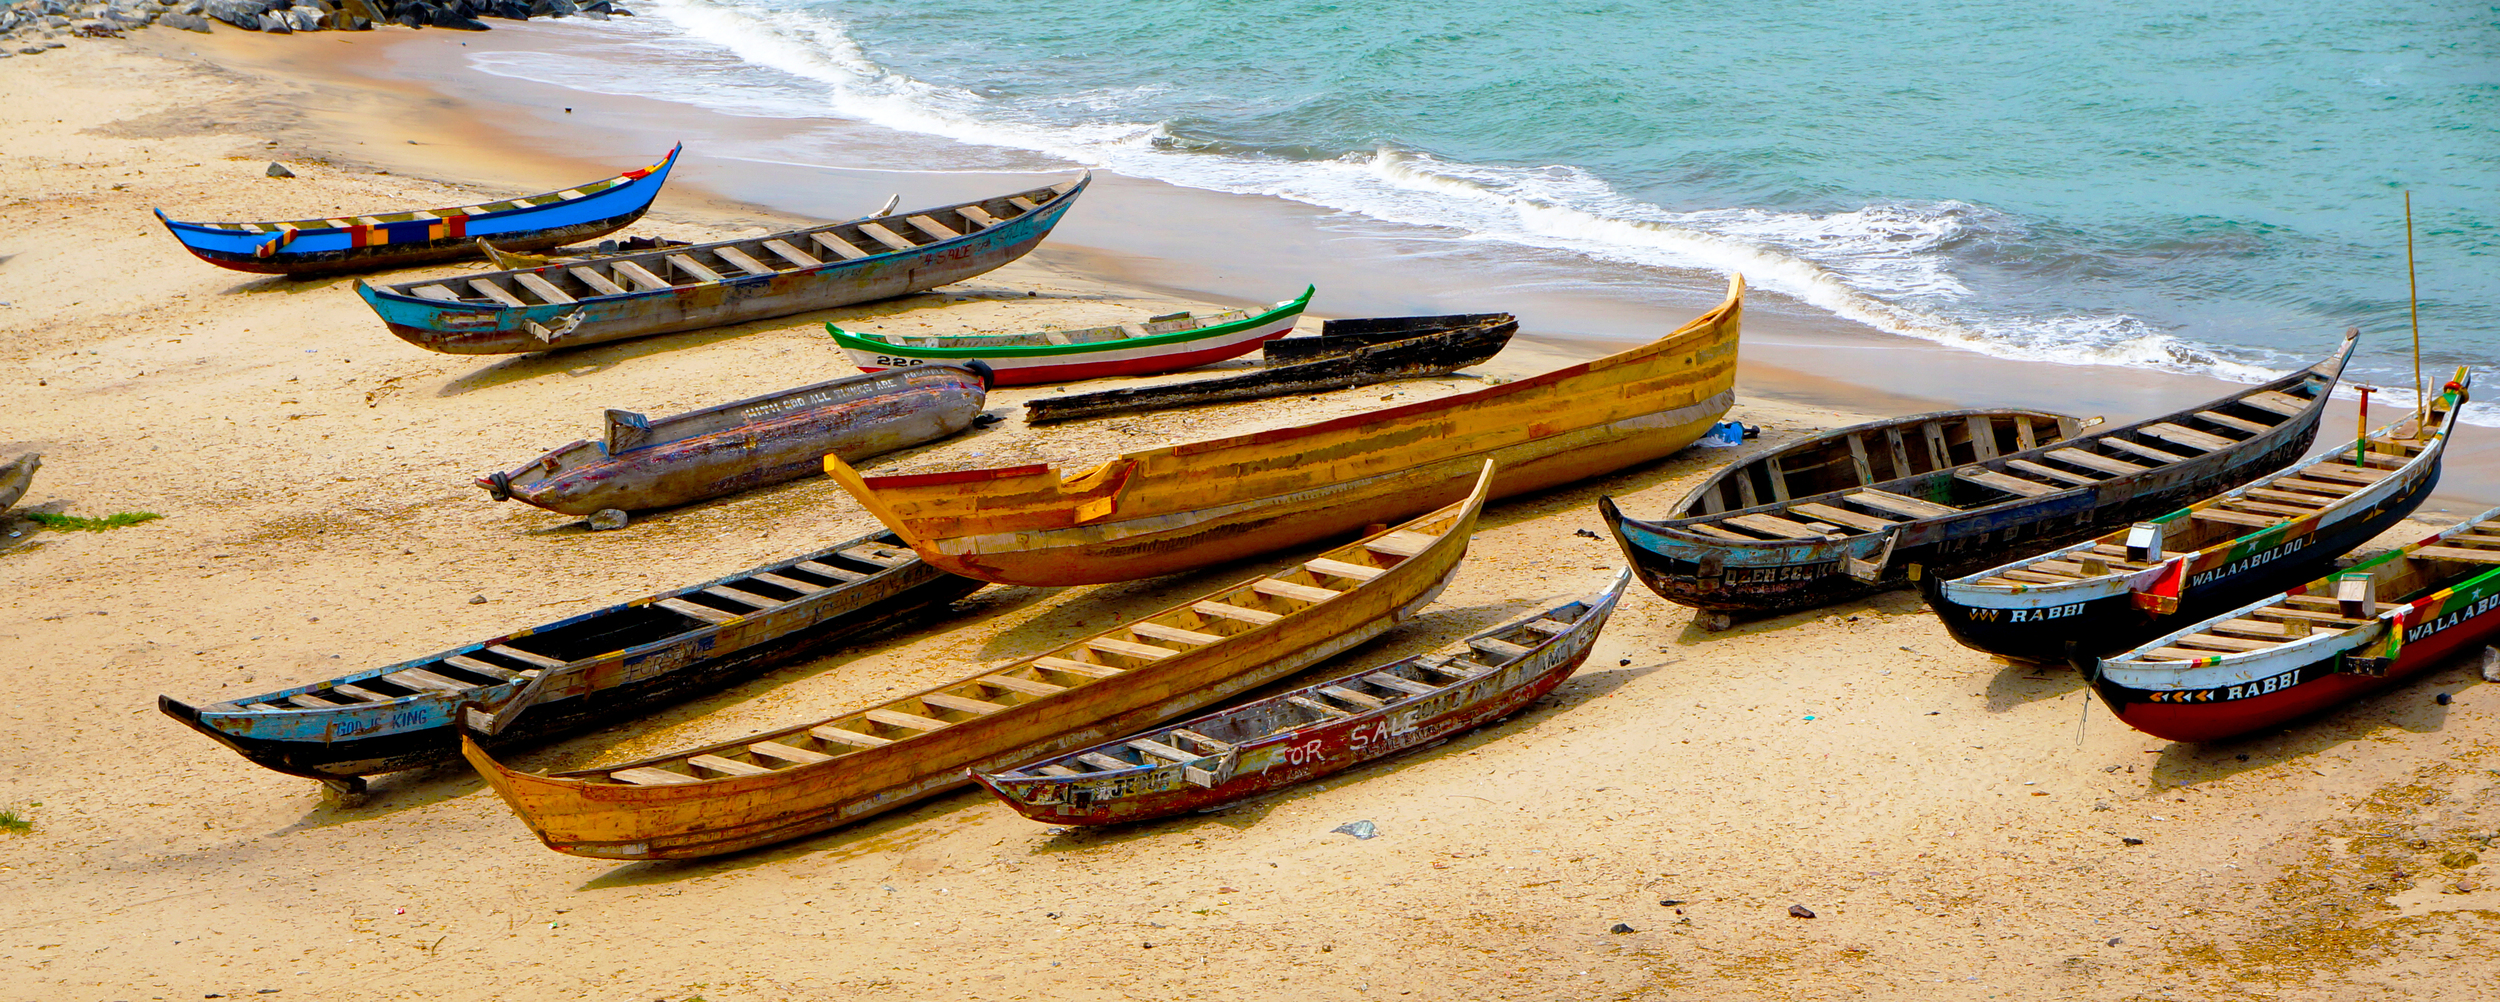 Boats at the Water's Edge at the Cape Coast Castle in Ghana